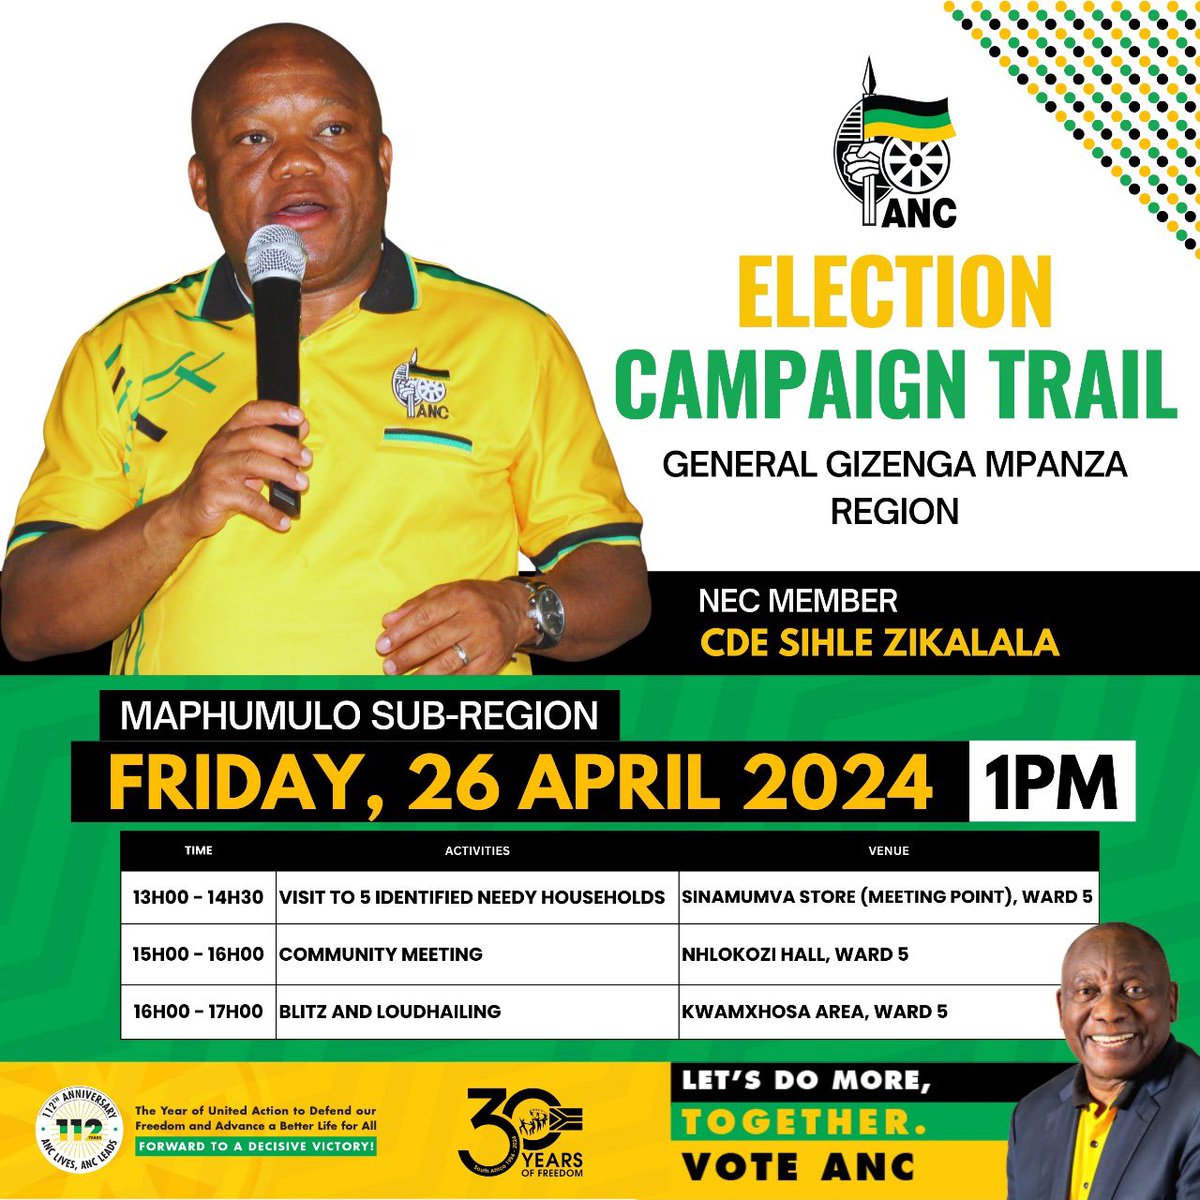 Road To Victory 🖤💚💛 ON THE CAMPAIGN TRAIL This Friday, we will be in General Gizenga Mpanza Region, Maphumulo Sub-Region. #VoteANC2024 #LetsDoMoreTogether #Elections2024 @myANC @ANCKZN